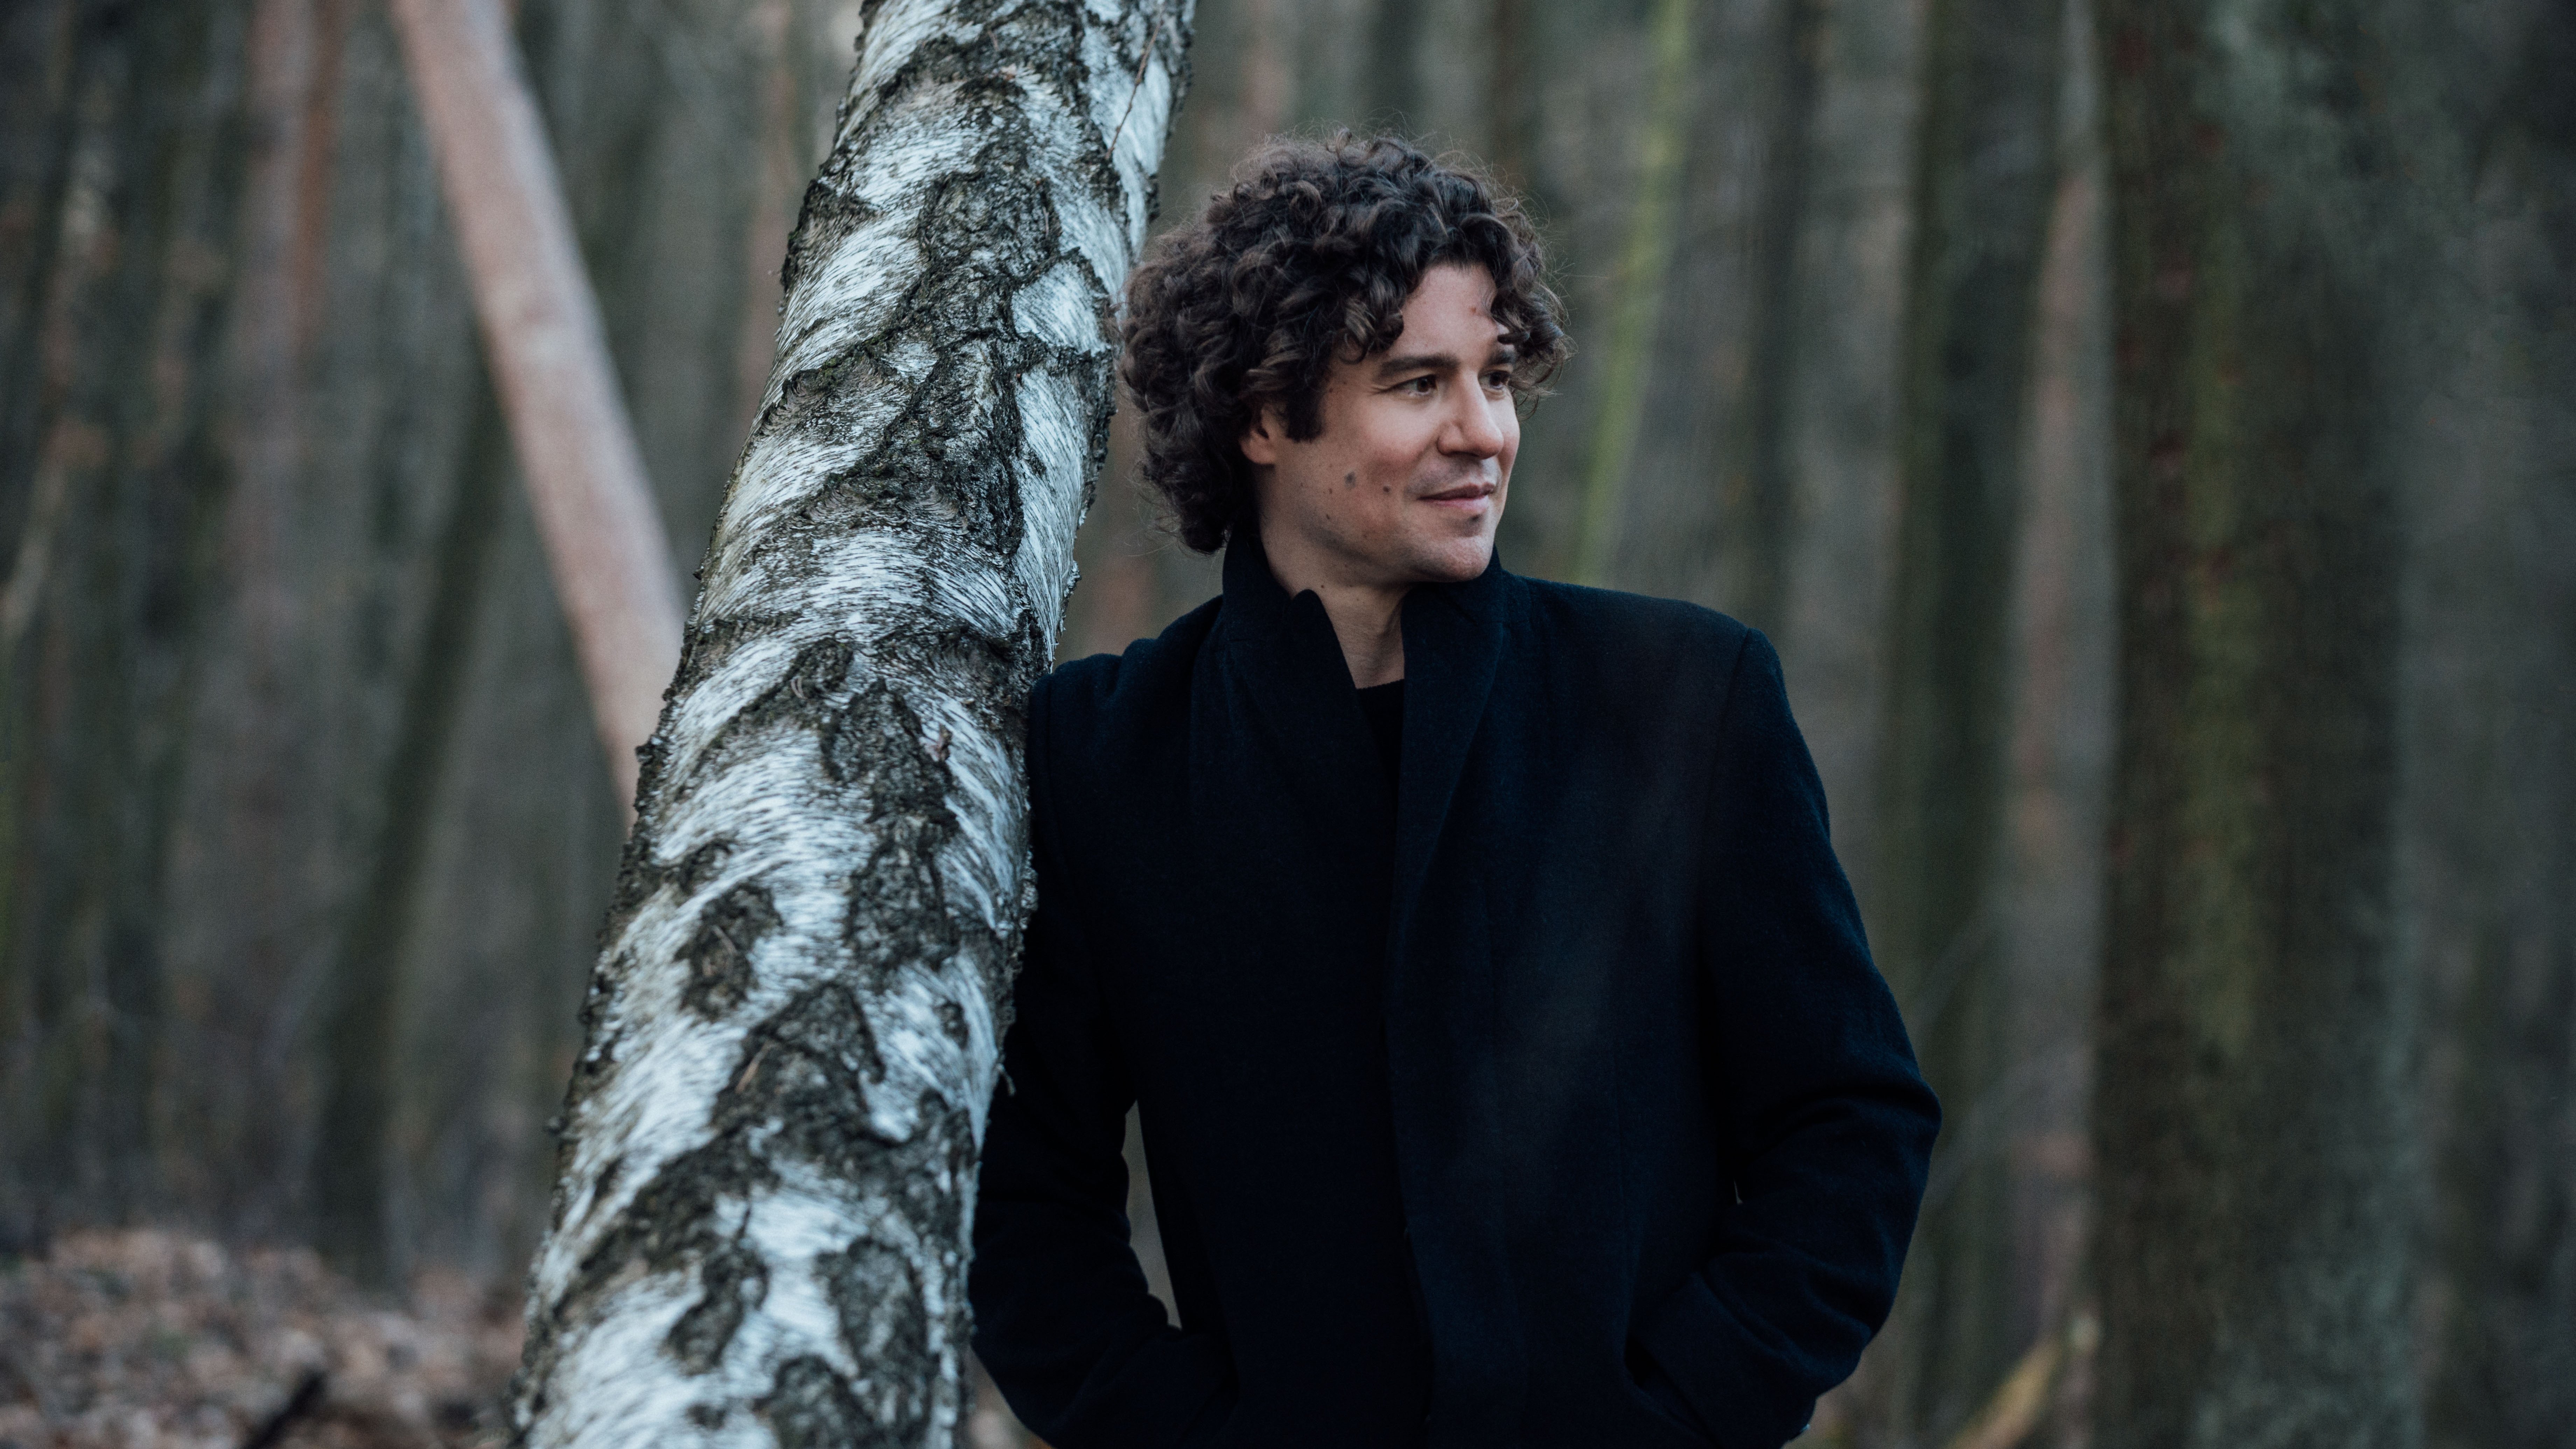 Robin Ticciati leans against a tree in the forest in his coat